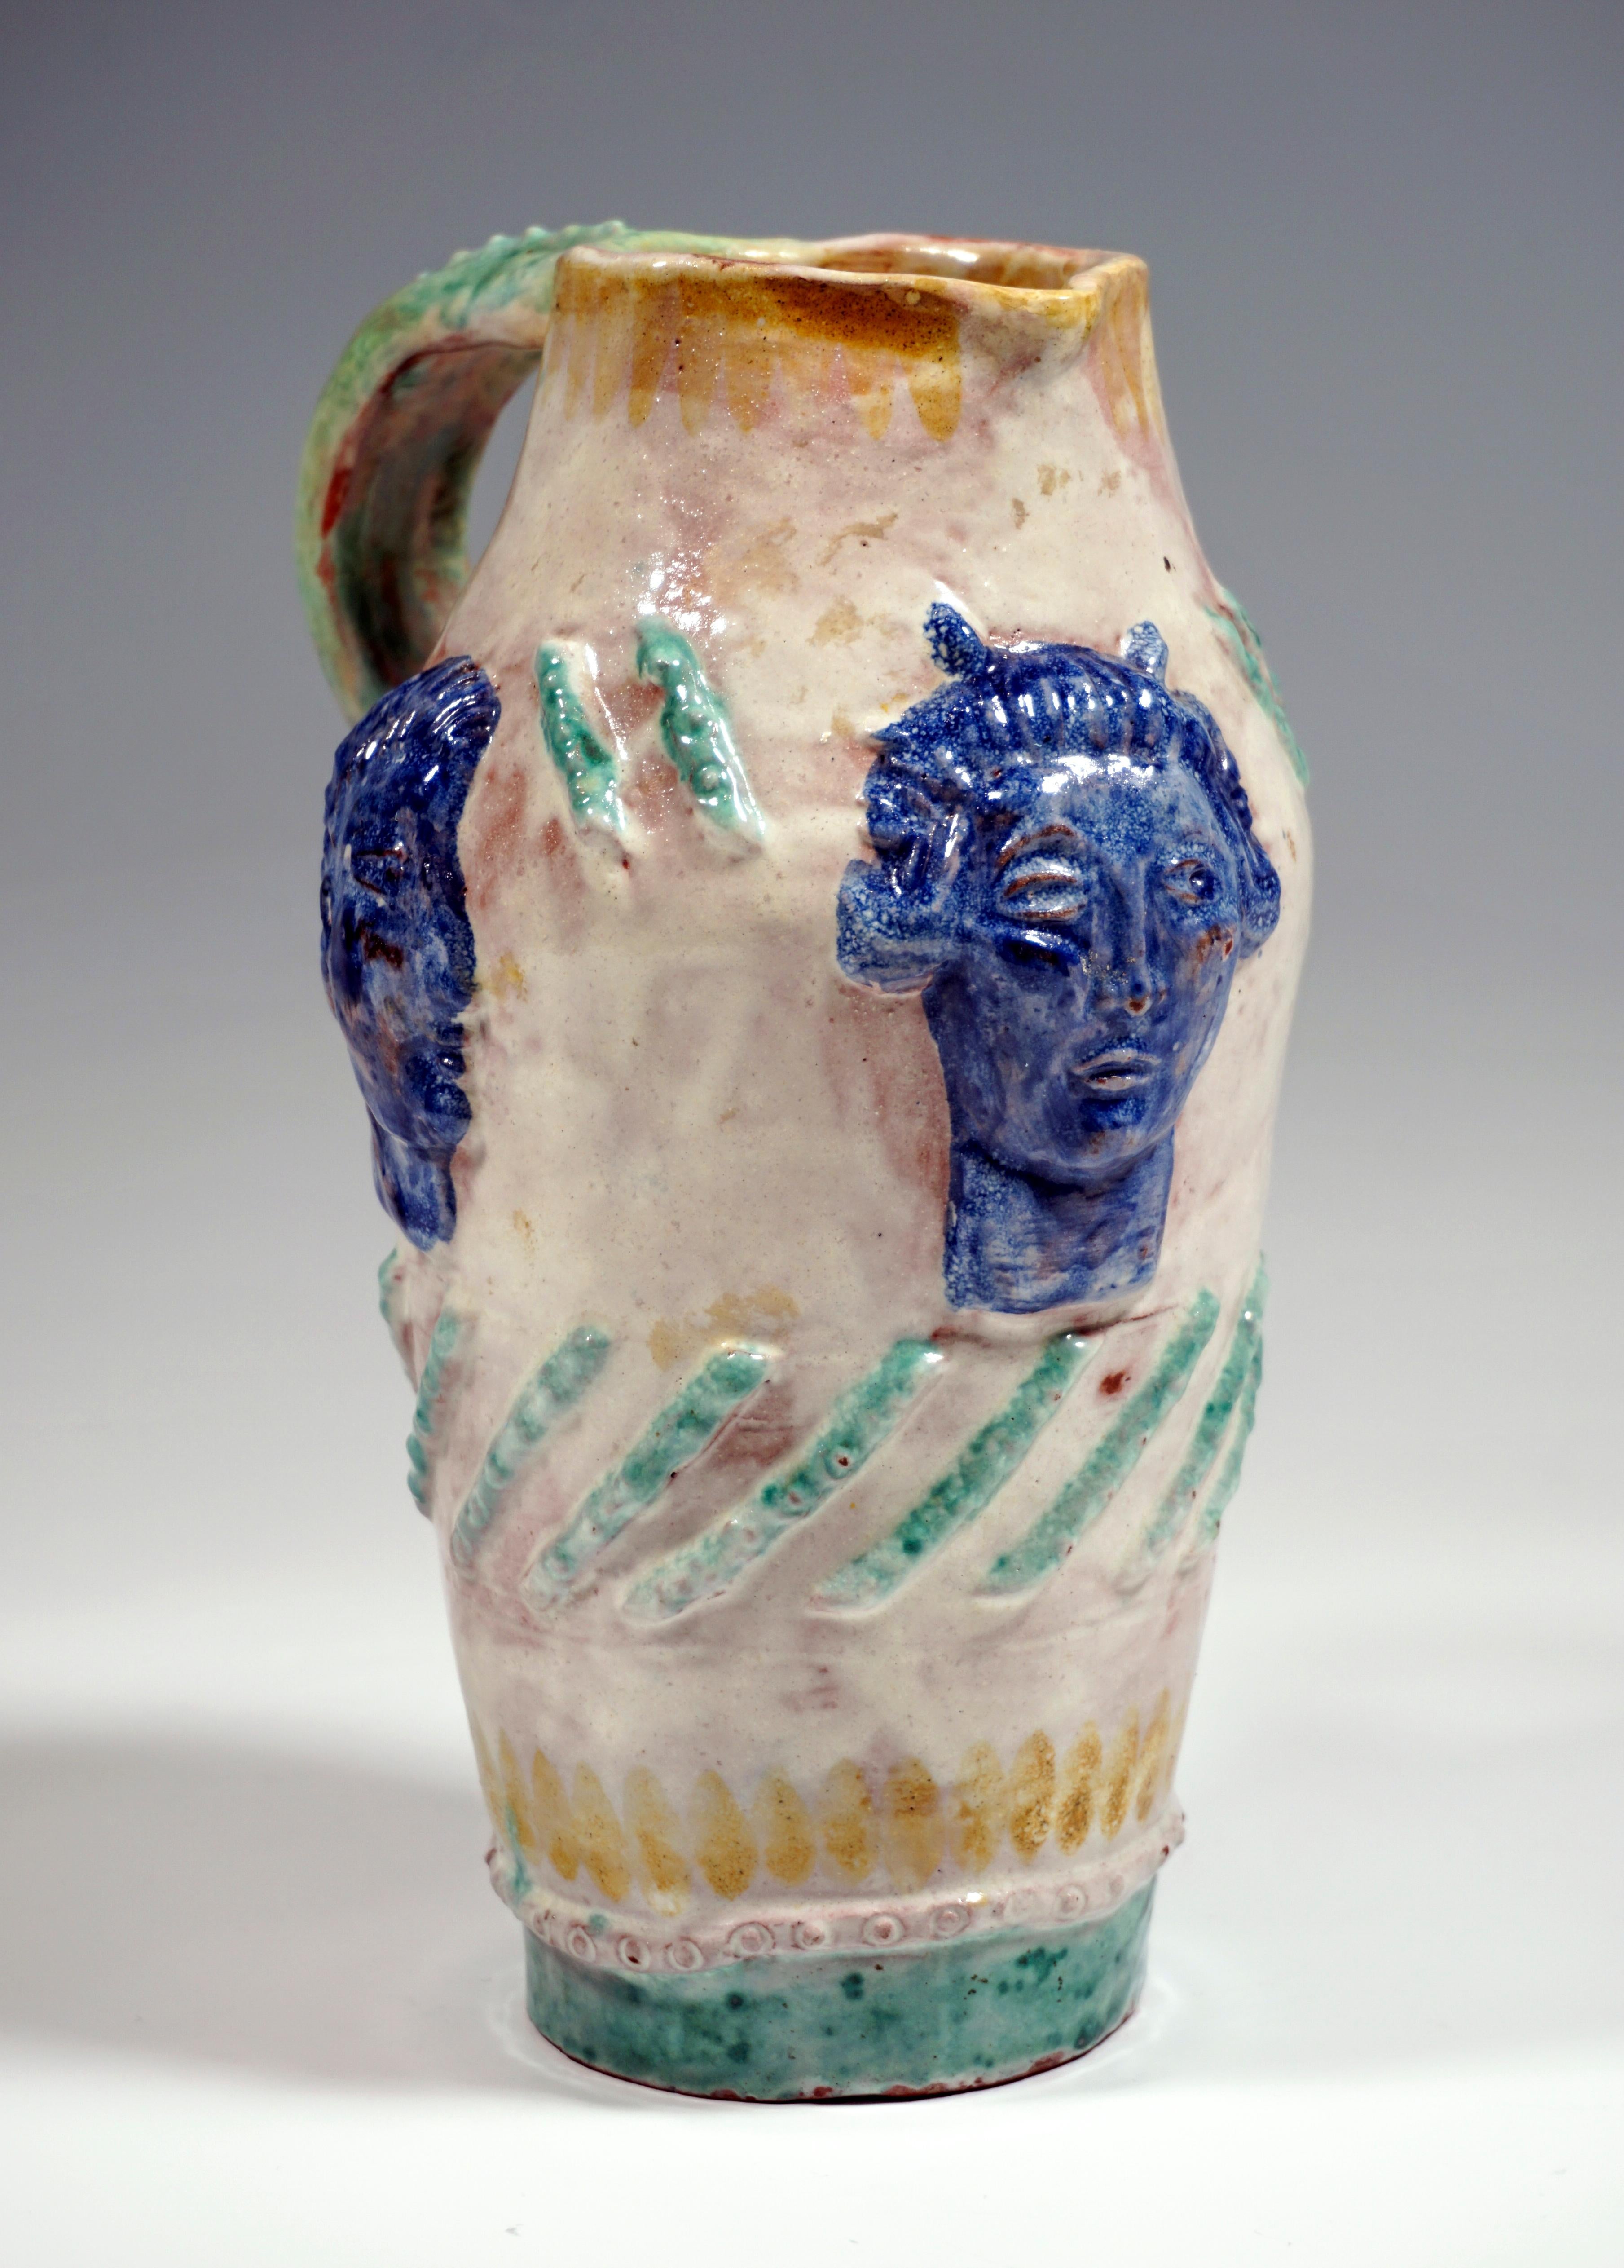 Slender jug, which widens in the upper part and narrows at the top again, with spout and opposite handle, surface decorated in relief with three antique-style heads and stylized, slanting pearl sticks, expressively colored glazed.

Manufactory: